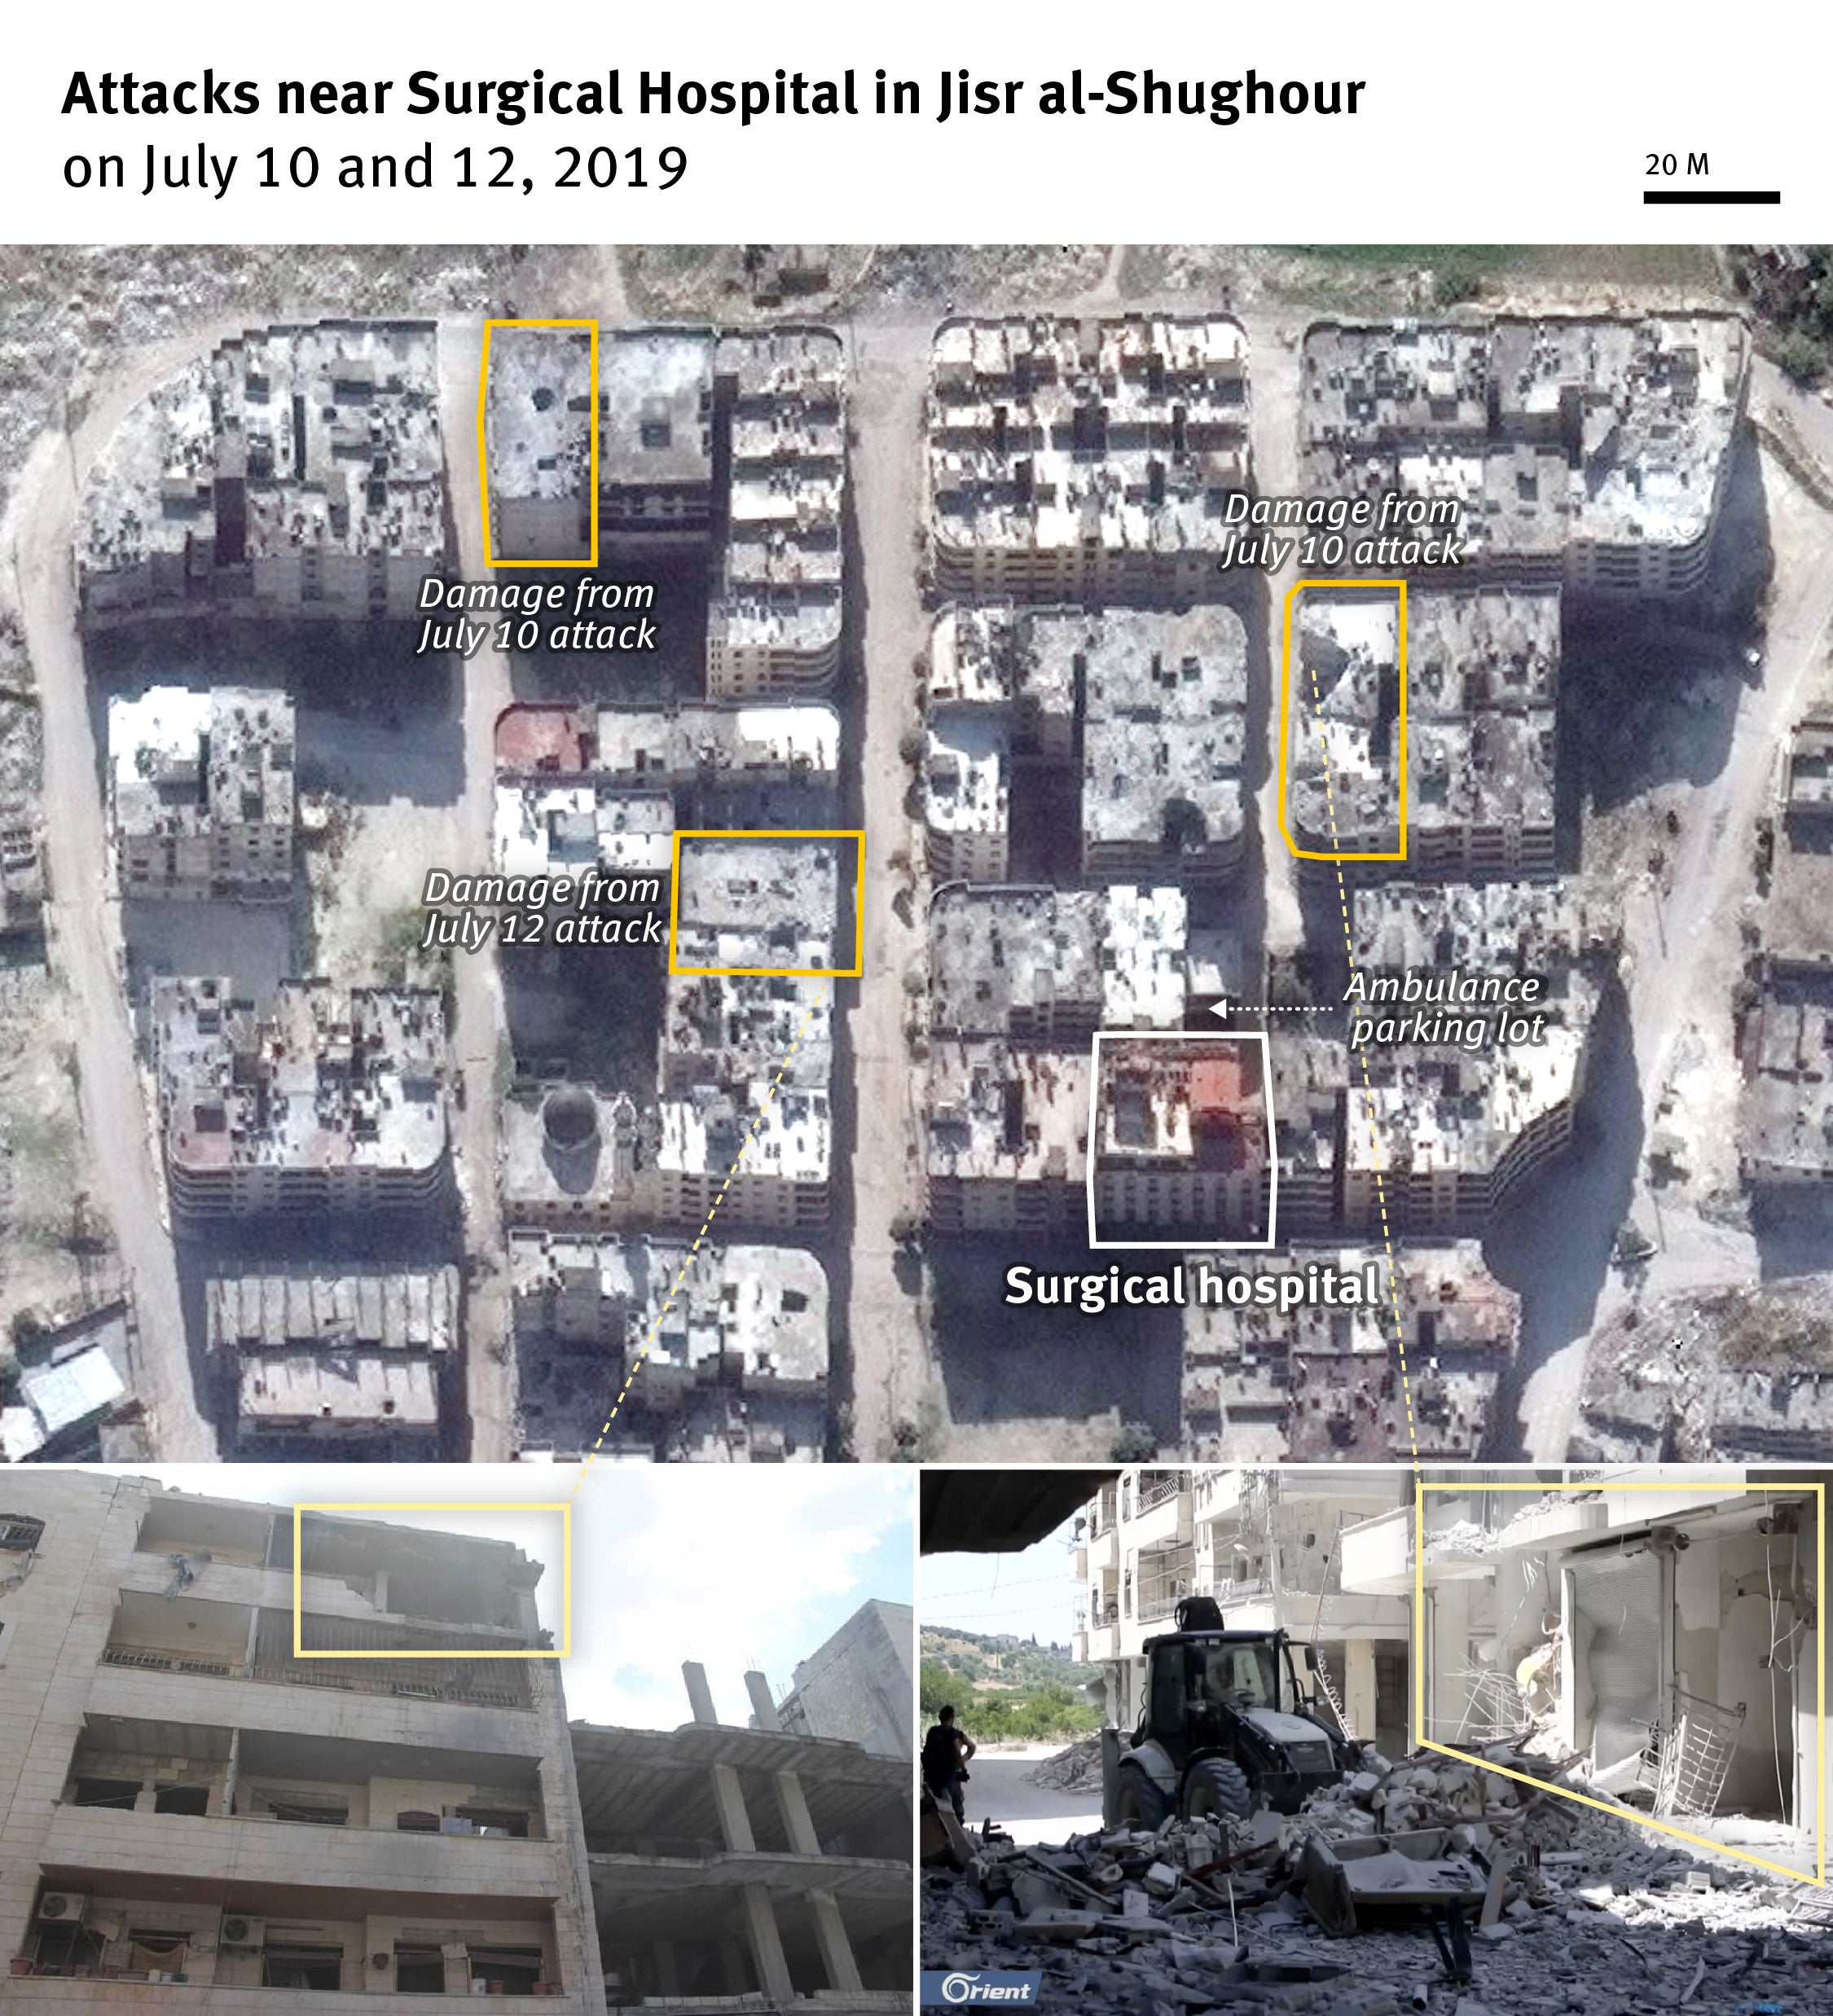 Satellite imagery showing attacks on July 10, 2019 and July 12, 2019